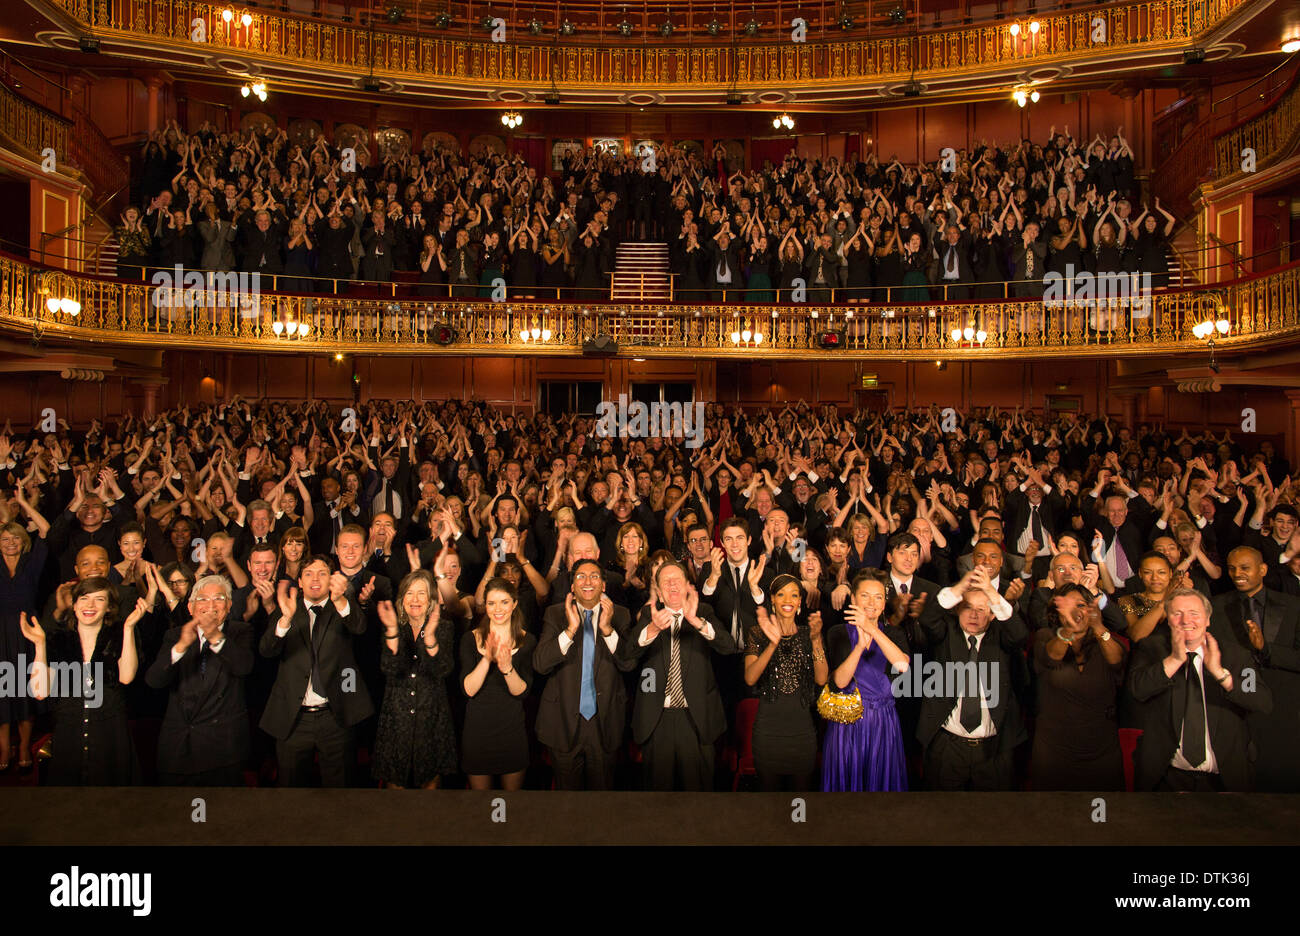 Audience applauding in theater Stock Photo